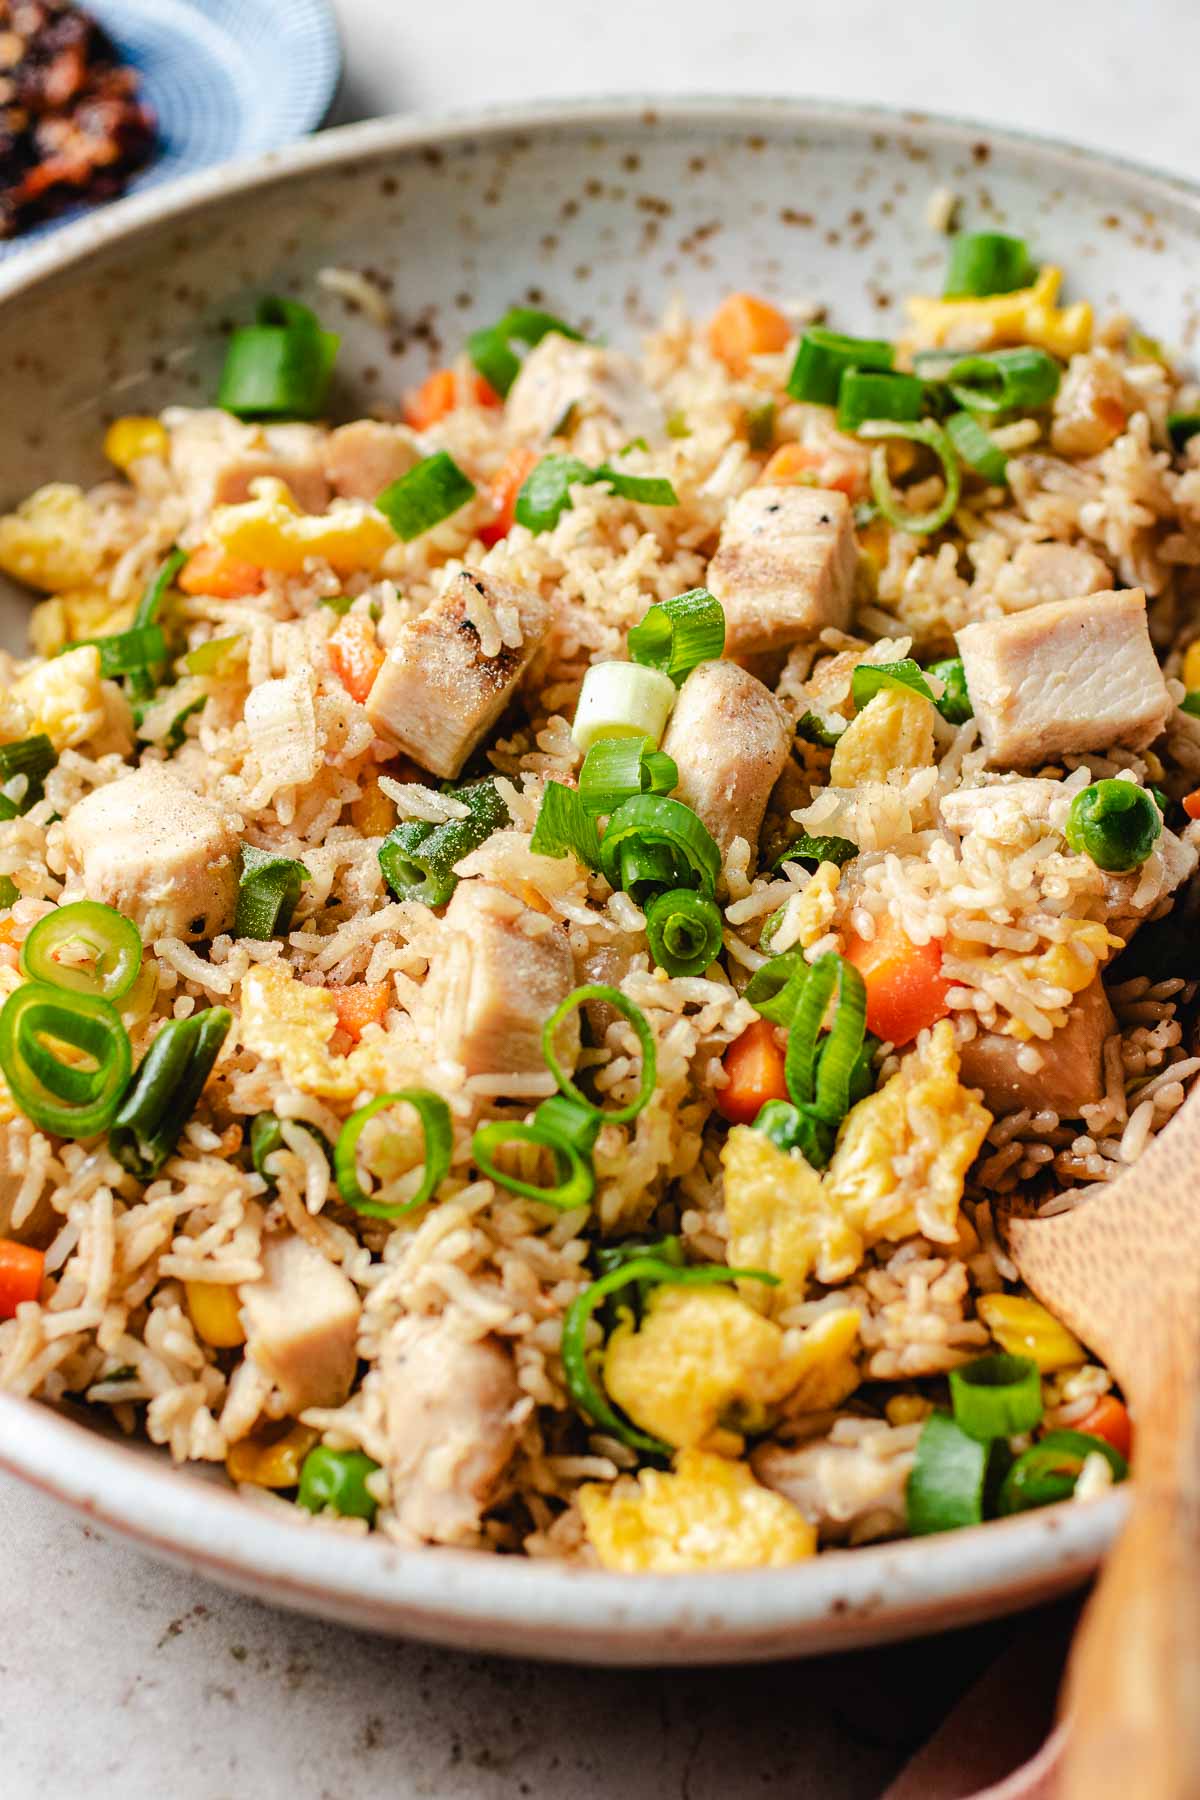 A side close shot image shows stir fried rice with leftover turkey and vegetables served on a white plate.